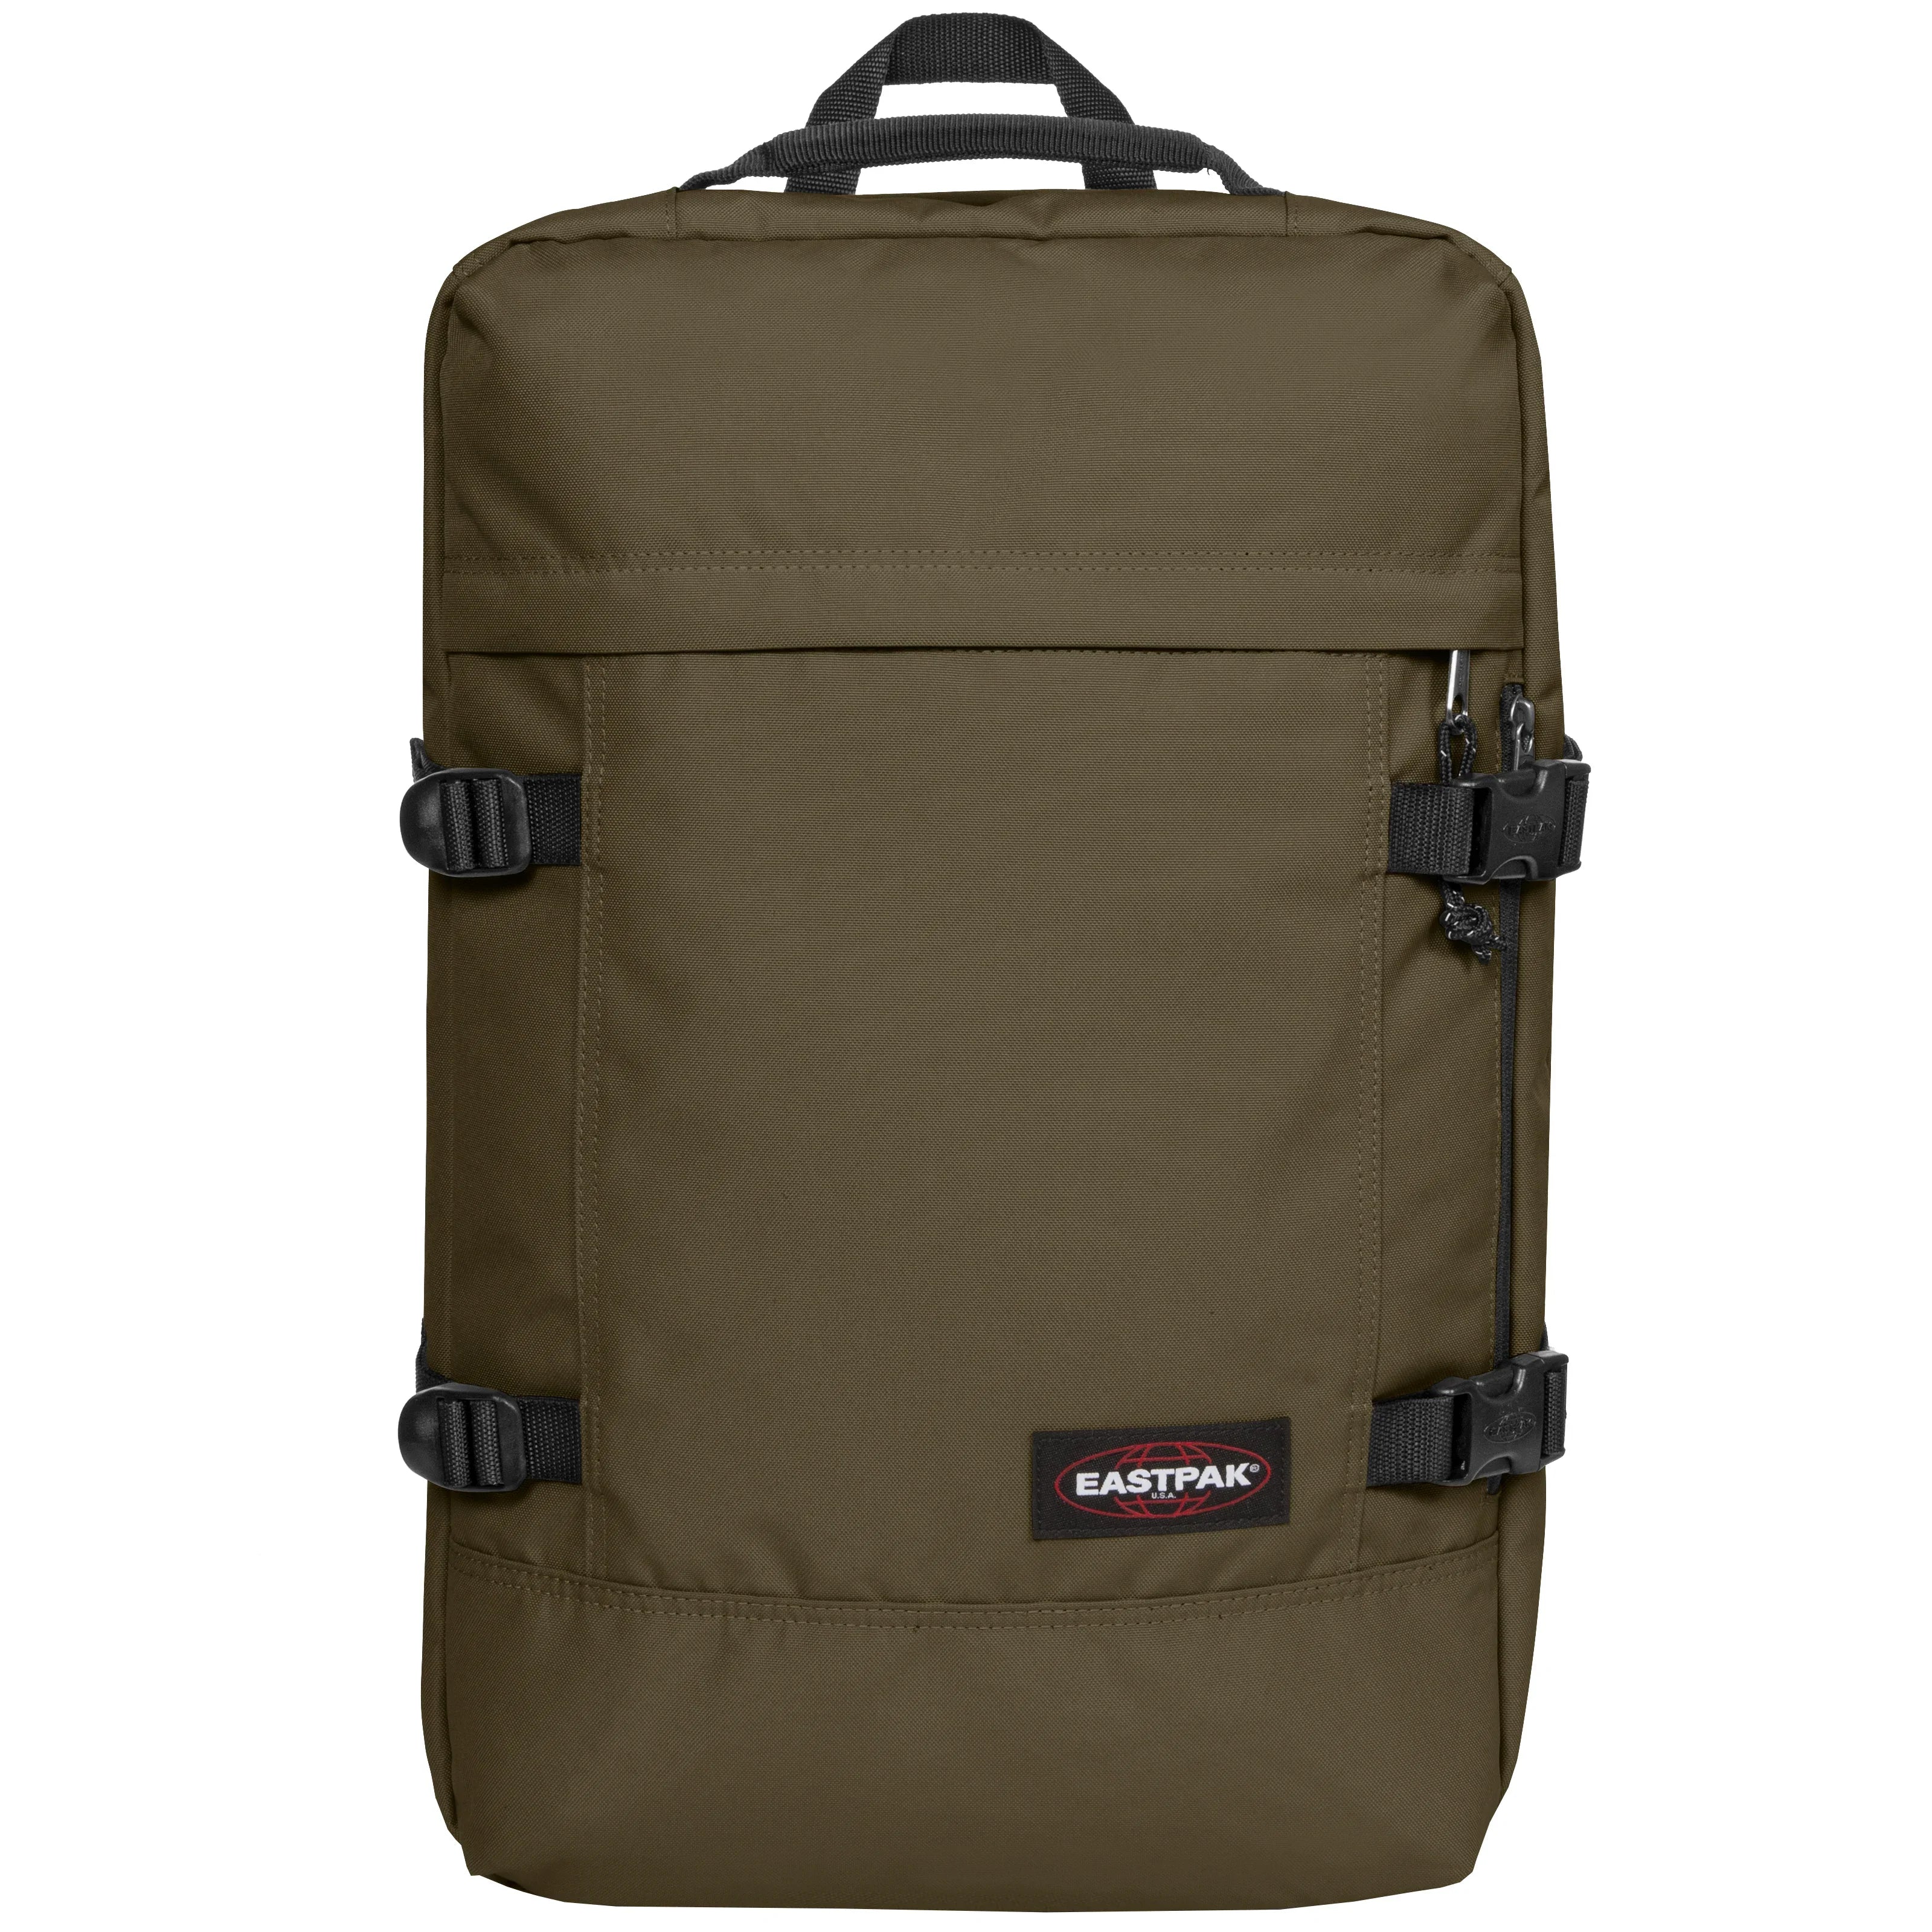 Eastpak Authentic Tranzpack Backpack 51 cm - Army Olive